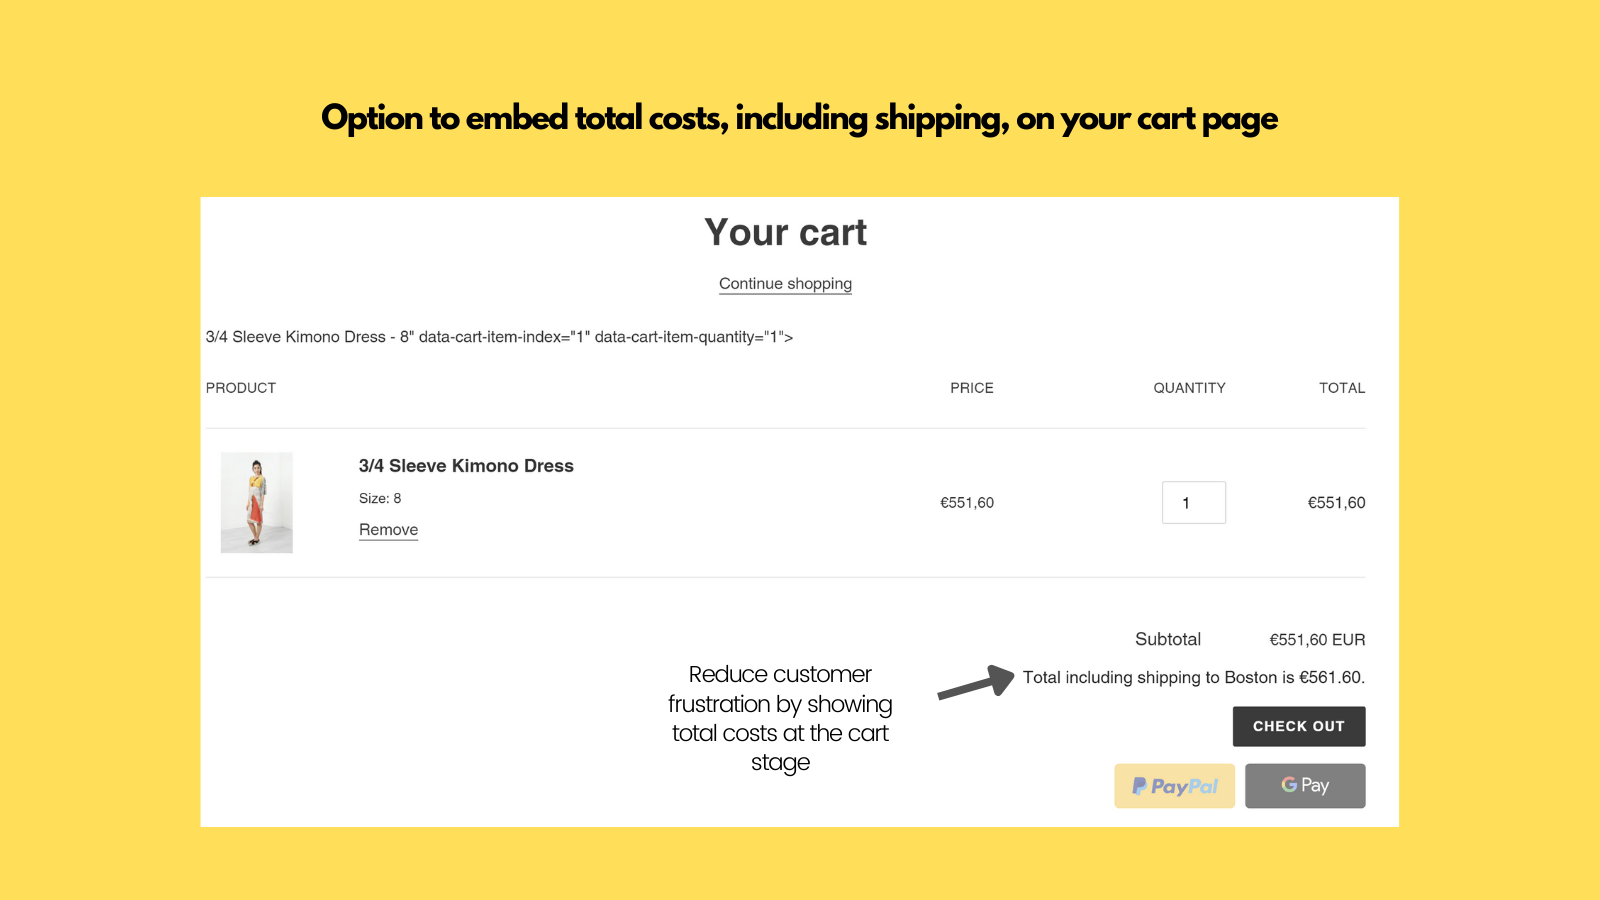 Option to embed shipping costs in cart page